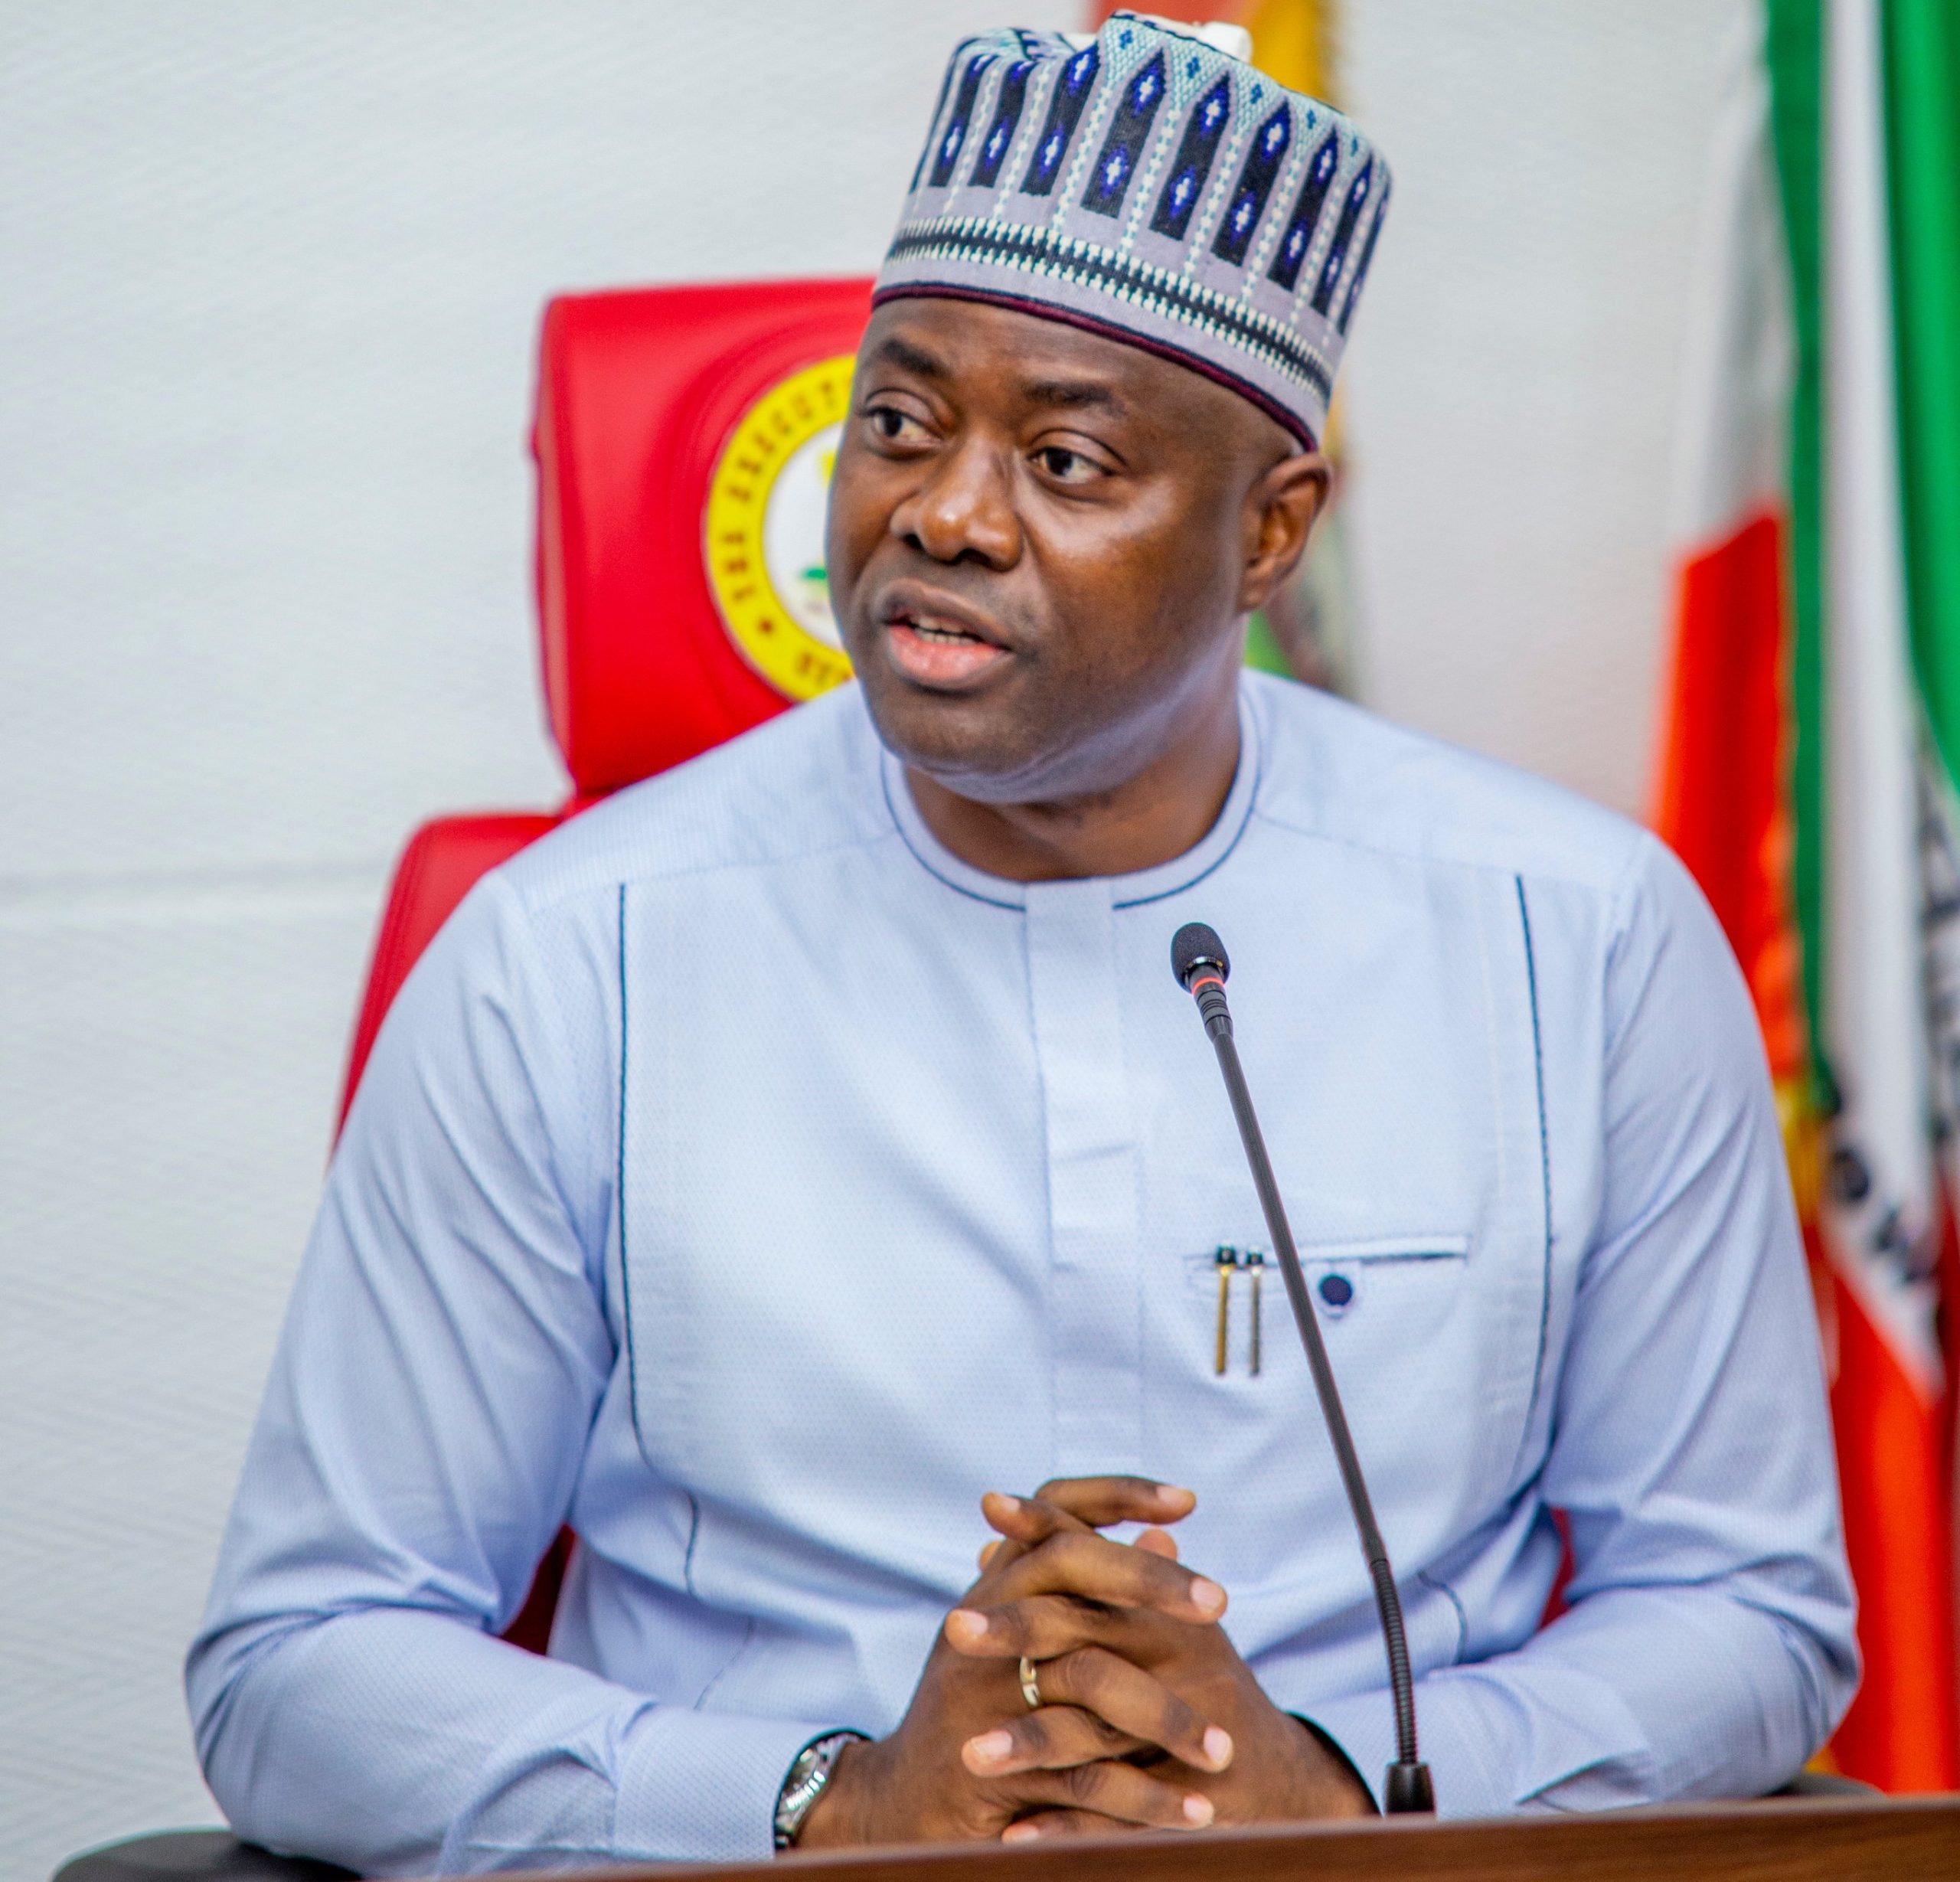 Gov. Makinde Approves N500m Loans For Traders, Small Business Owners In Oyo